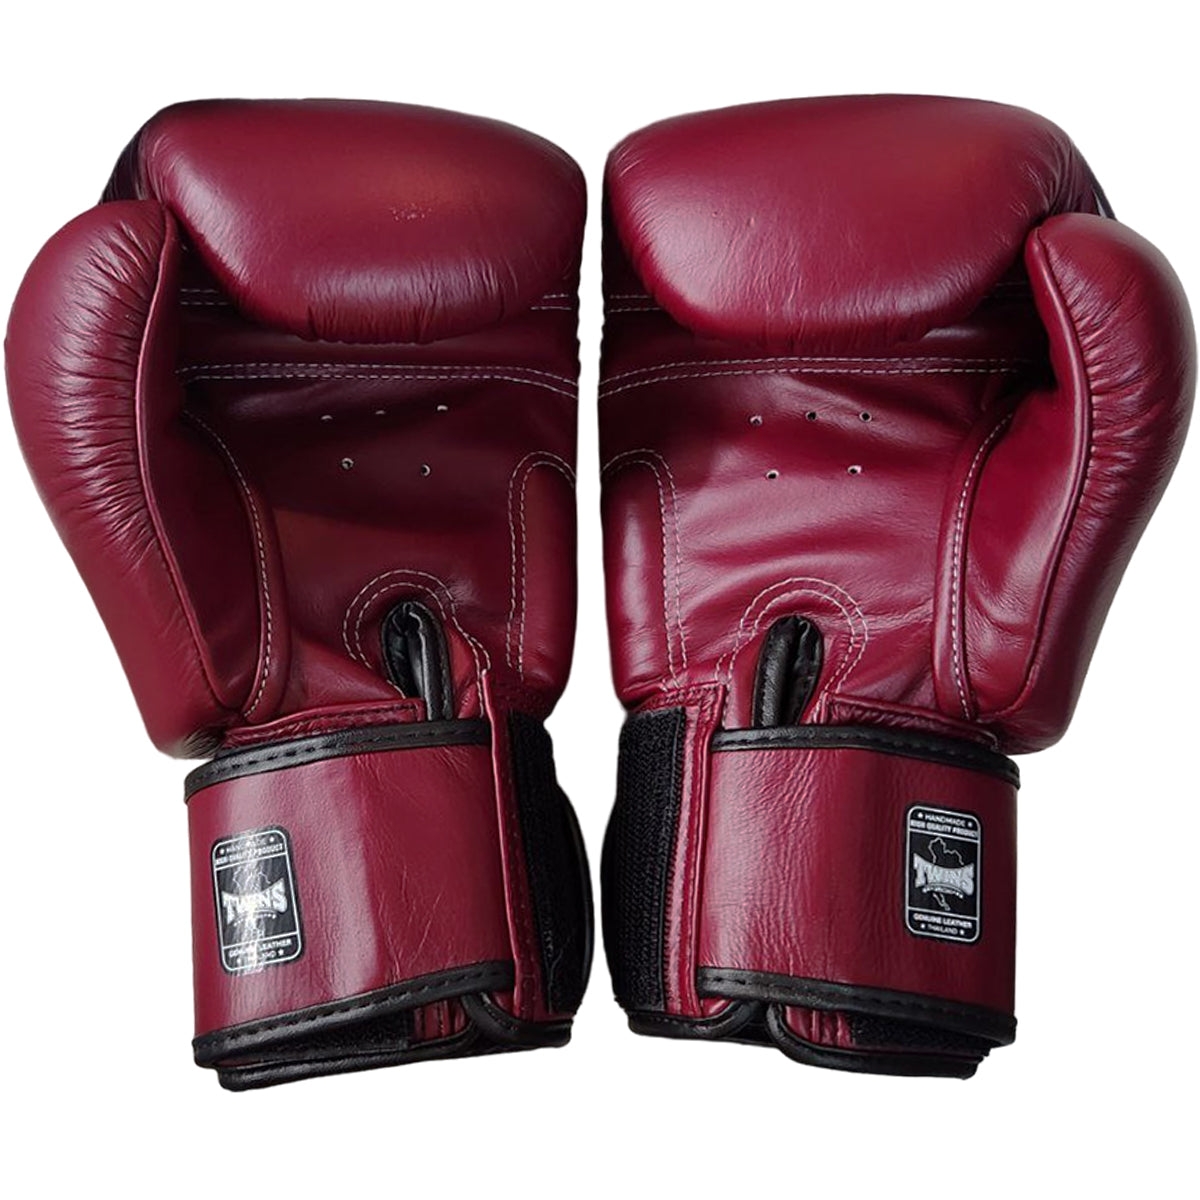 Boxing Gloves Twins Special  BGVL3 Burgundy